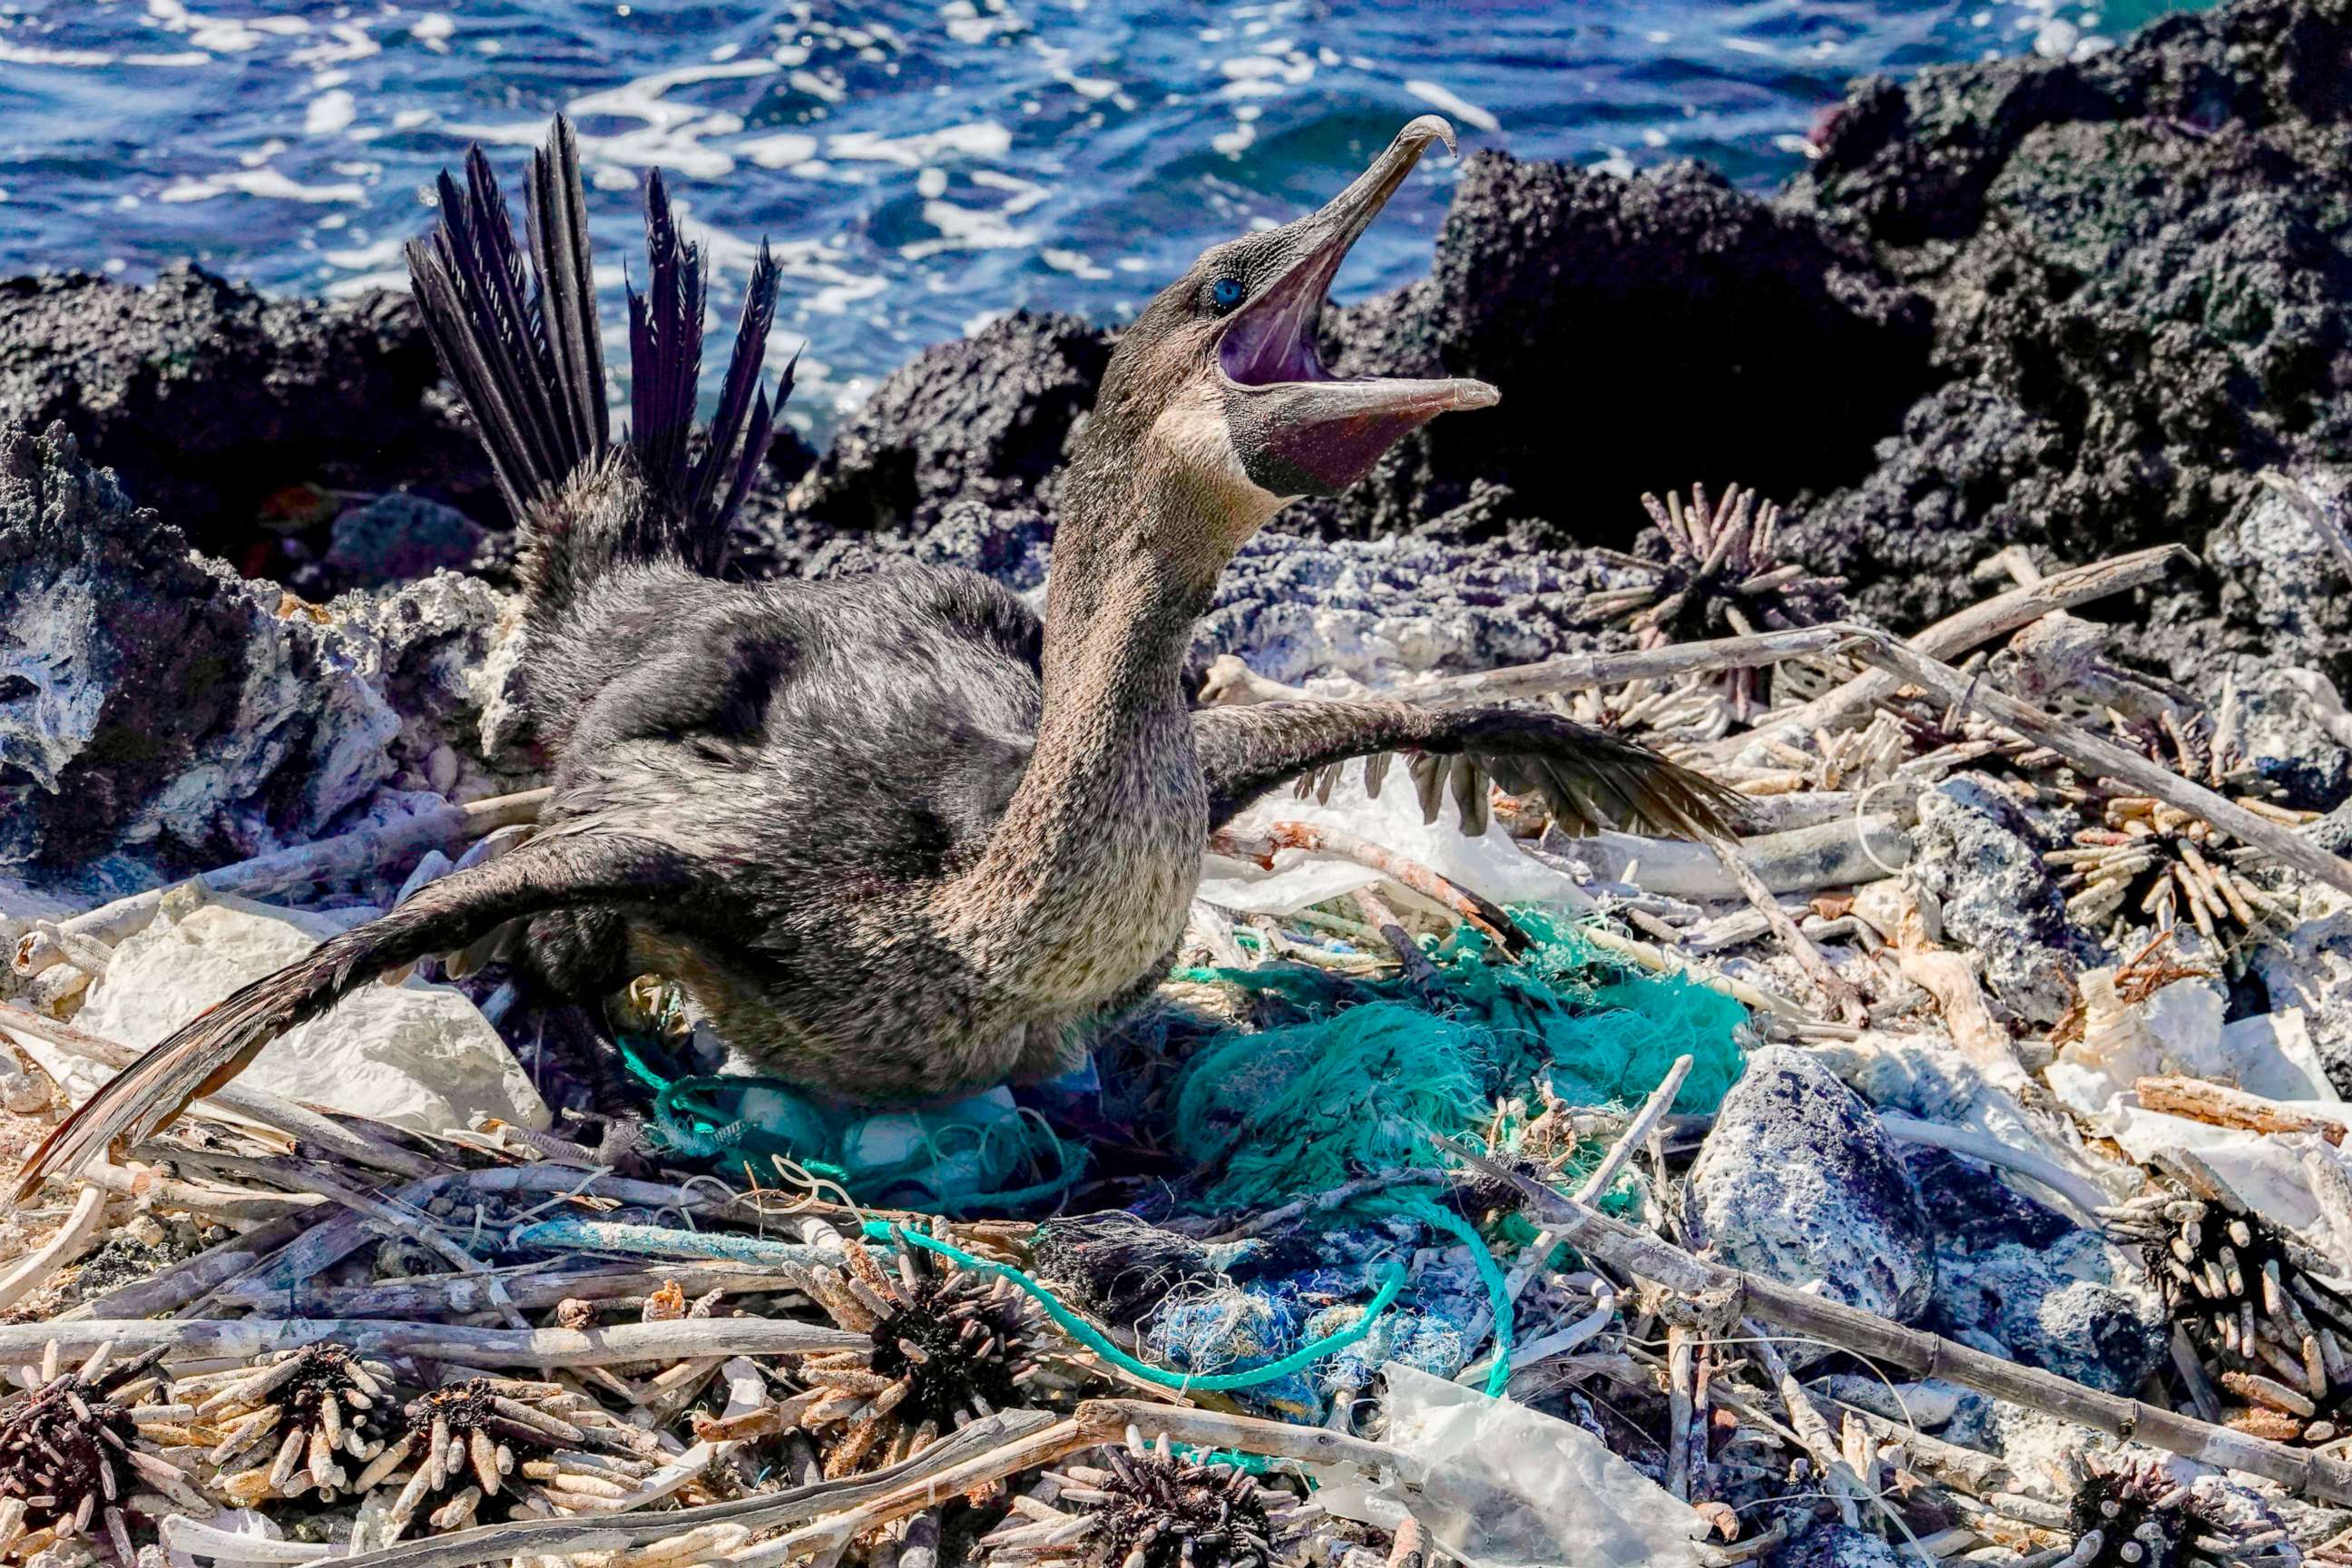 PHOTO: A flightless cormorant sits on her nest surrounded by garbage on the shore of Isabela Island in the Galapagos Archipelago in the Pacific Ocean, Feb. 21, 2019.